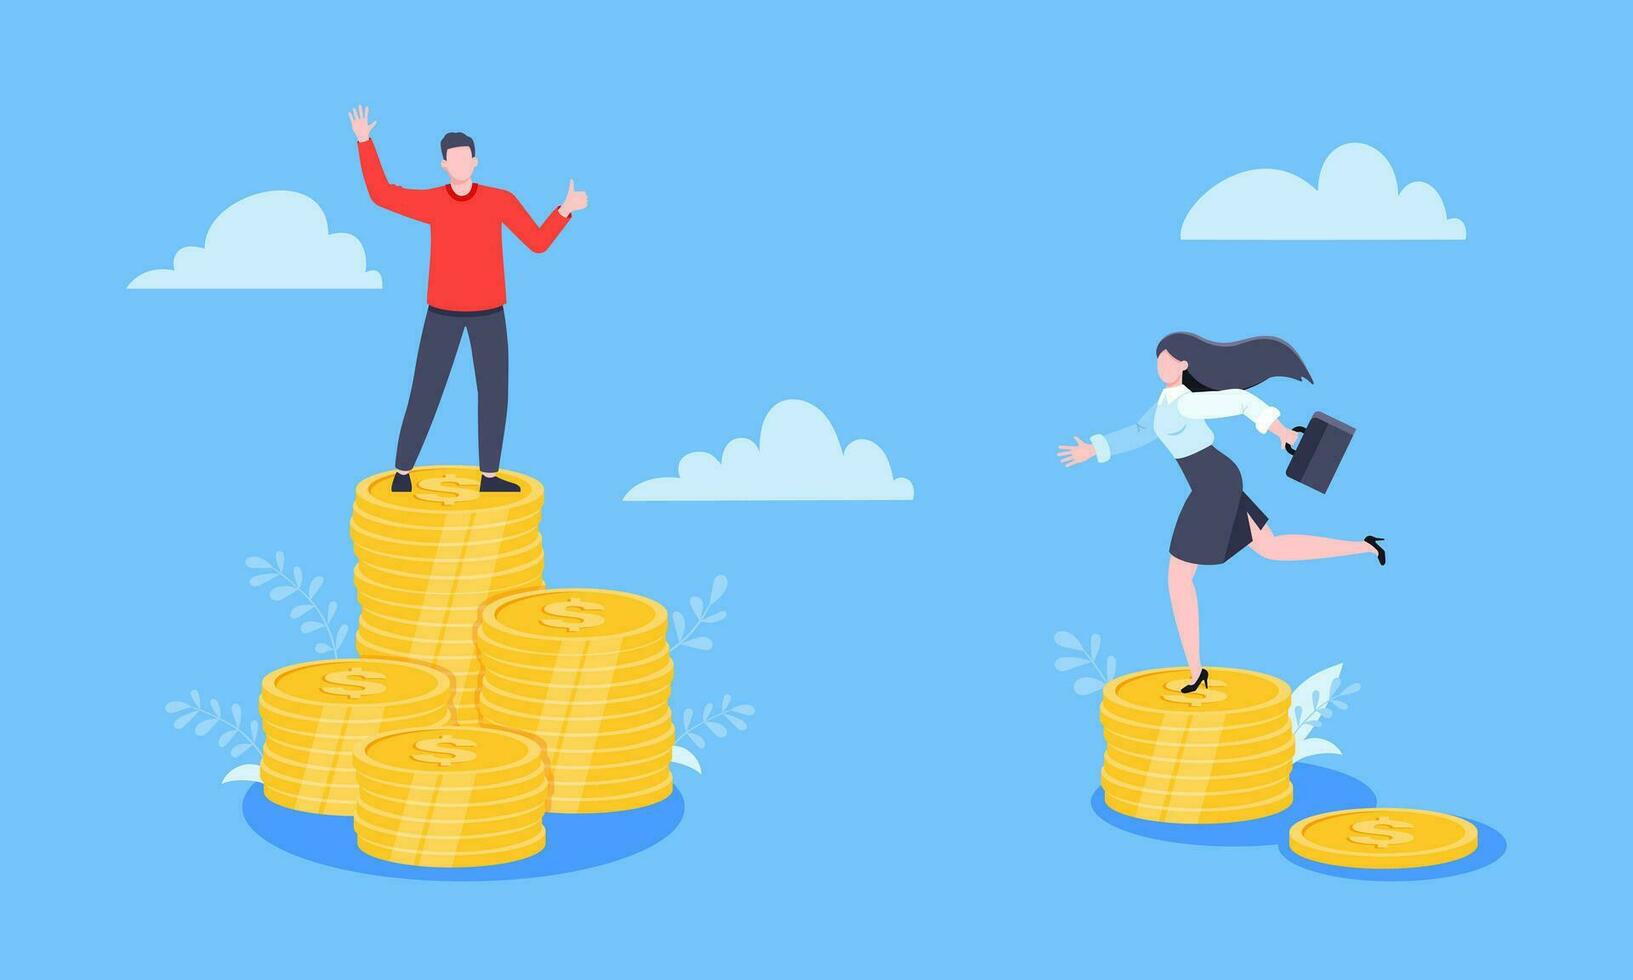 Salary and gender Inequality gap between women and men business concept flat style design vector illustration.